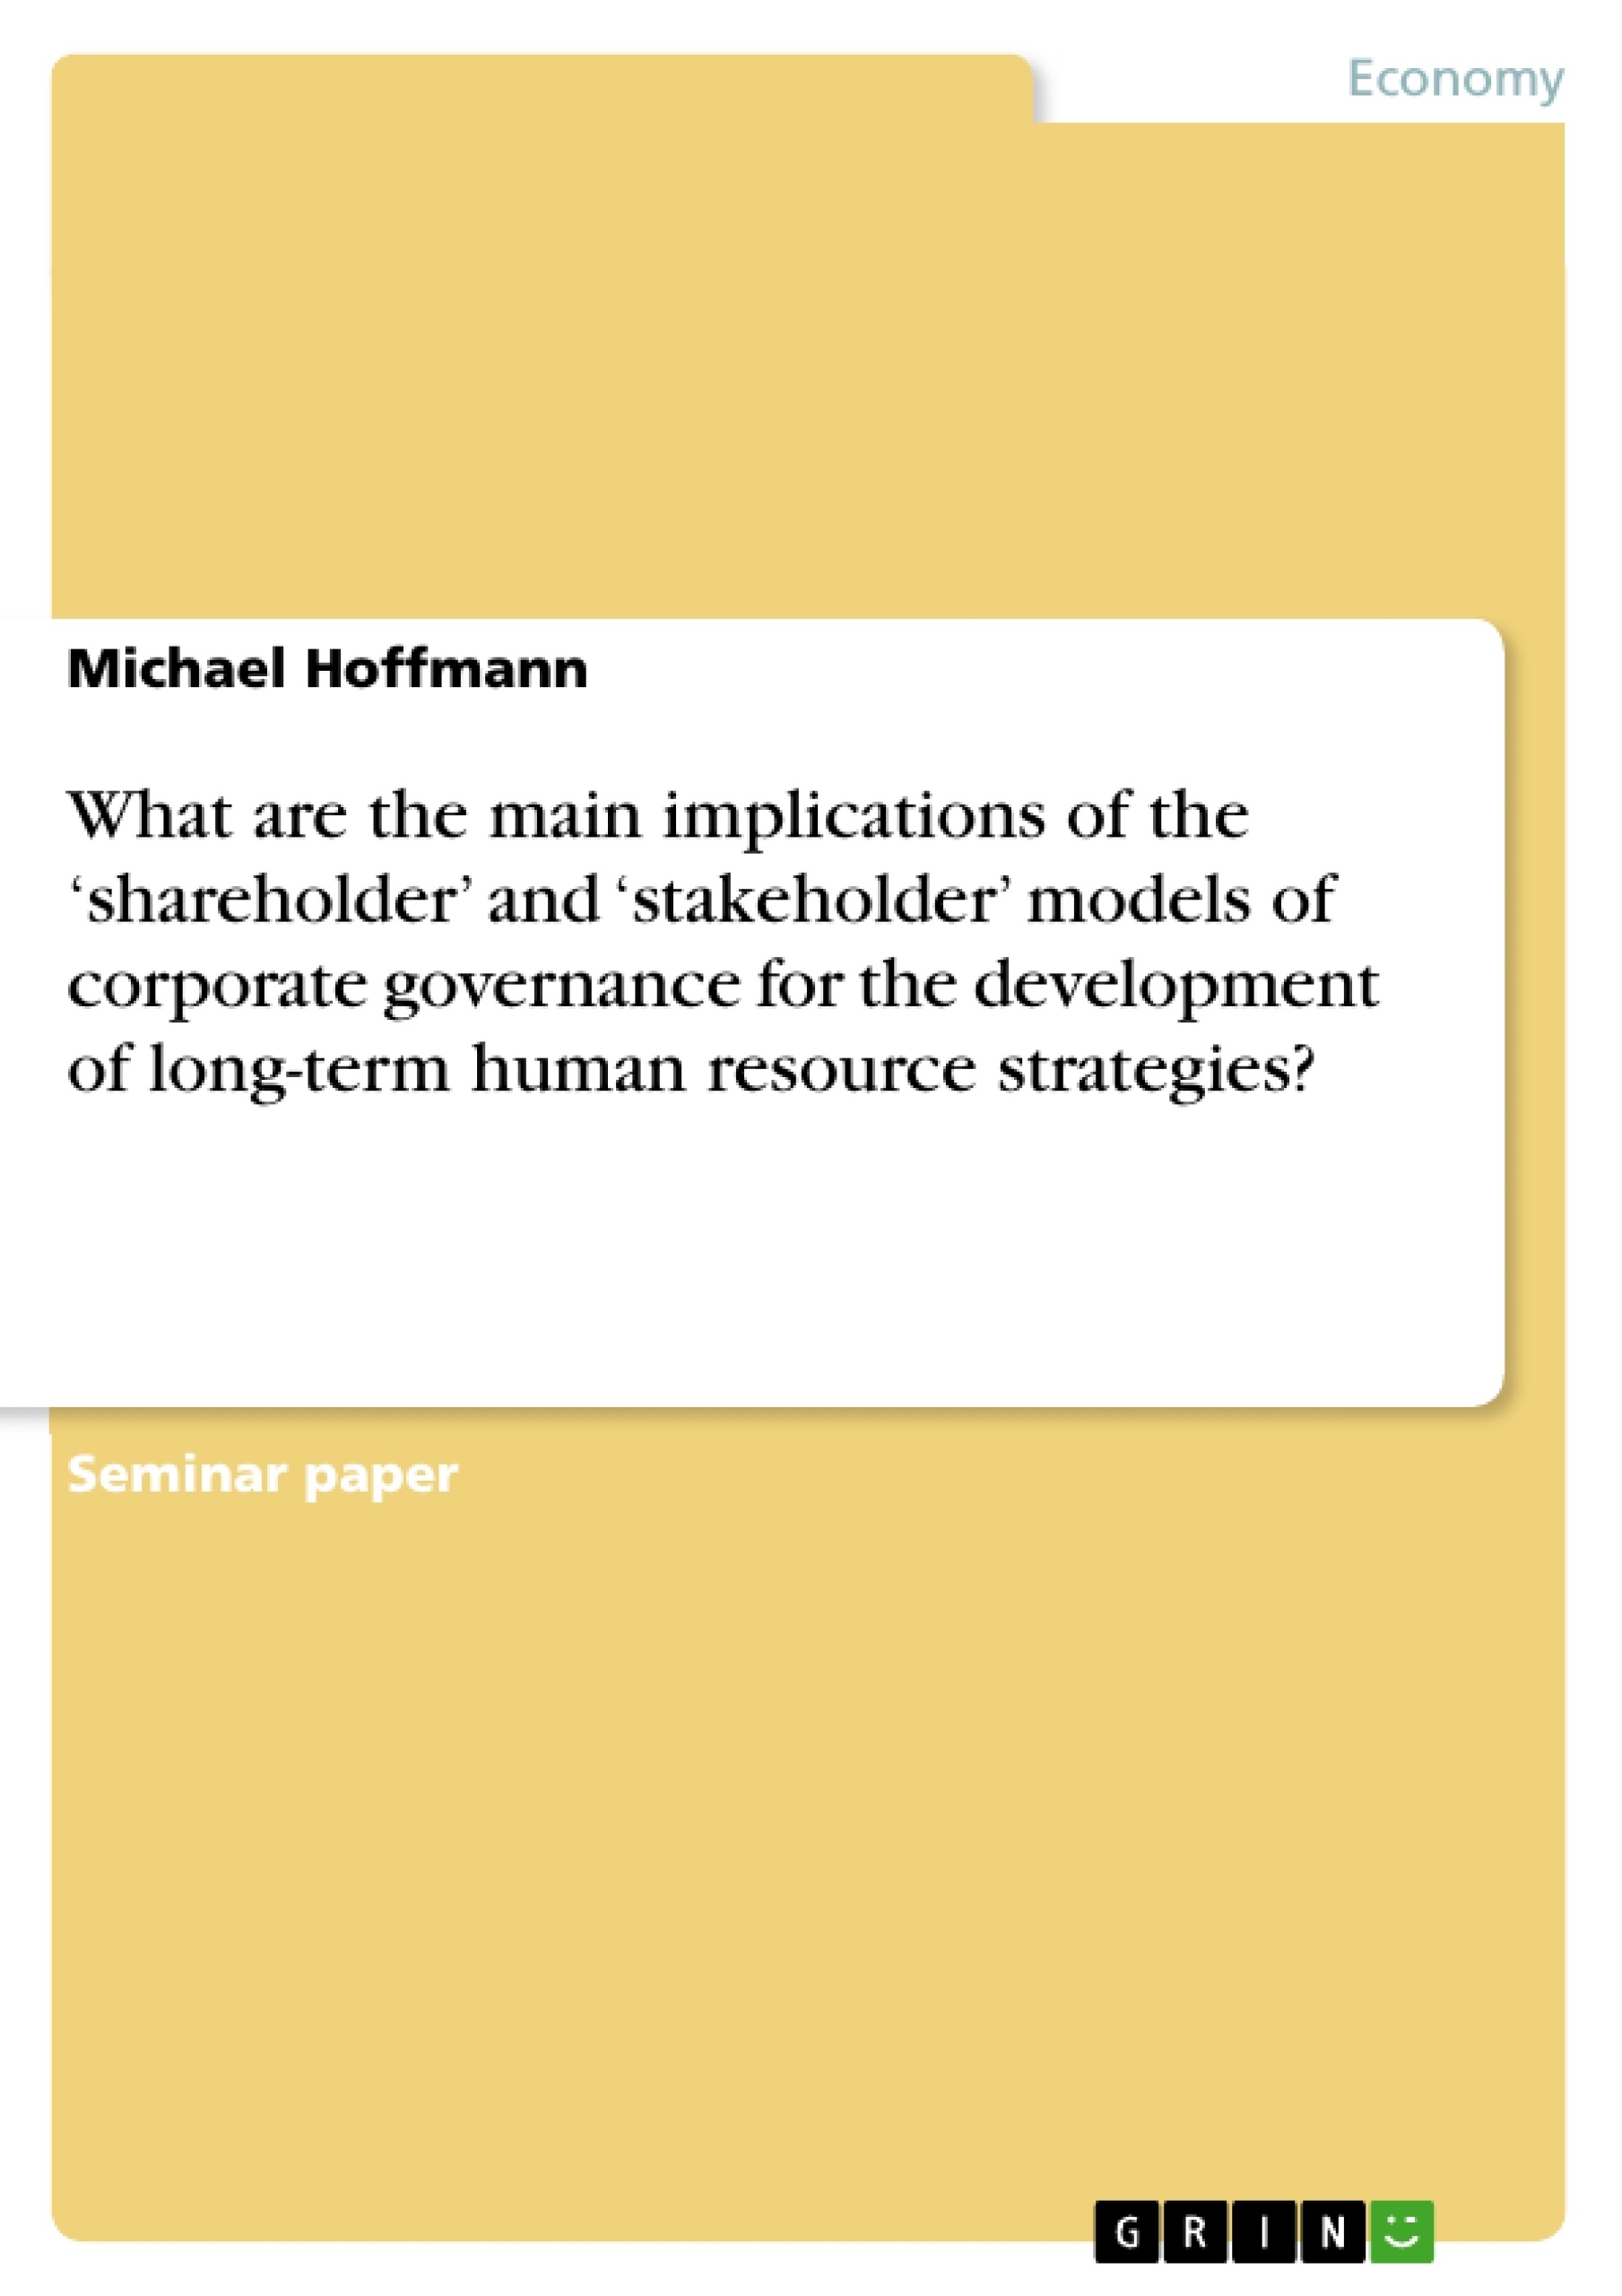 Title: What are the main implications of the ‘shareholder’ and ‘stakeholder’ models of corporate governance for the development of long-term human resource strategies?